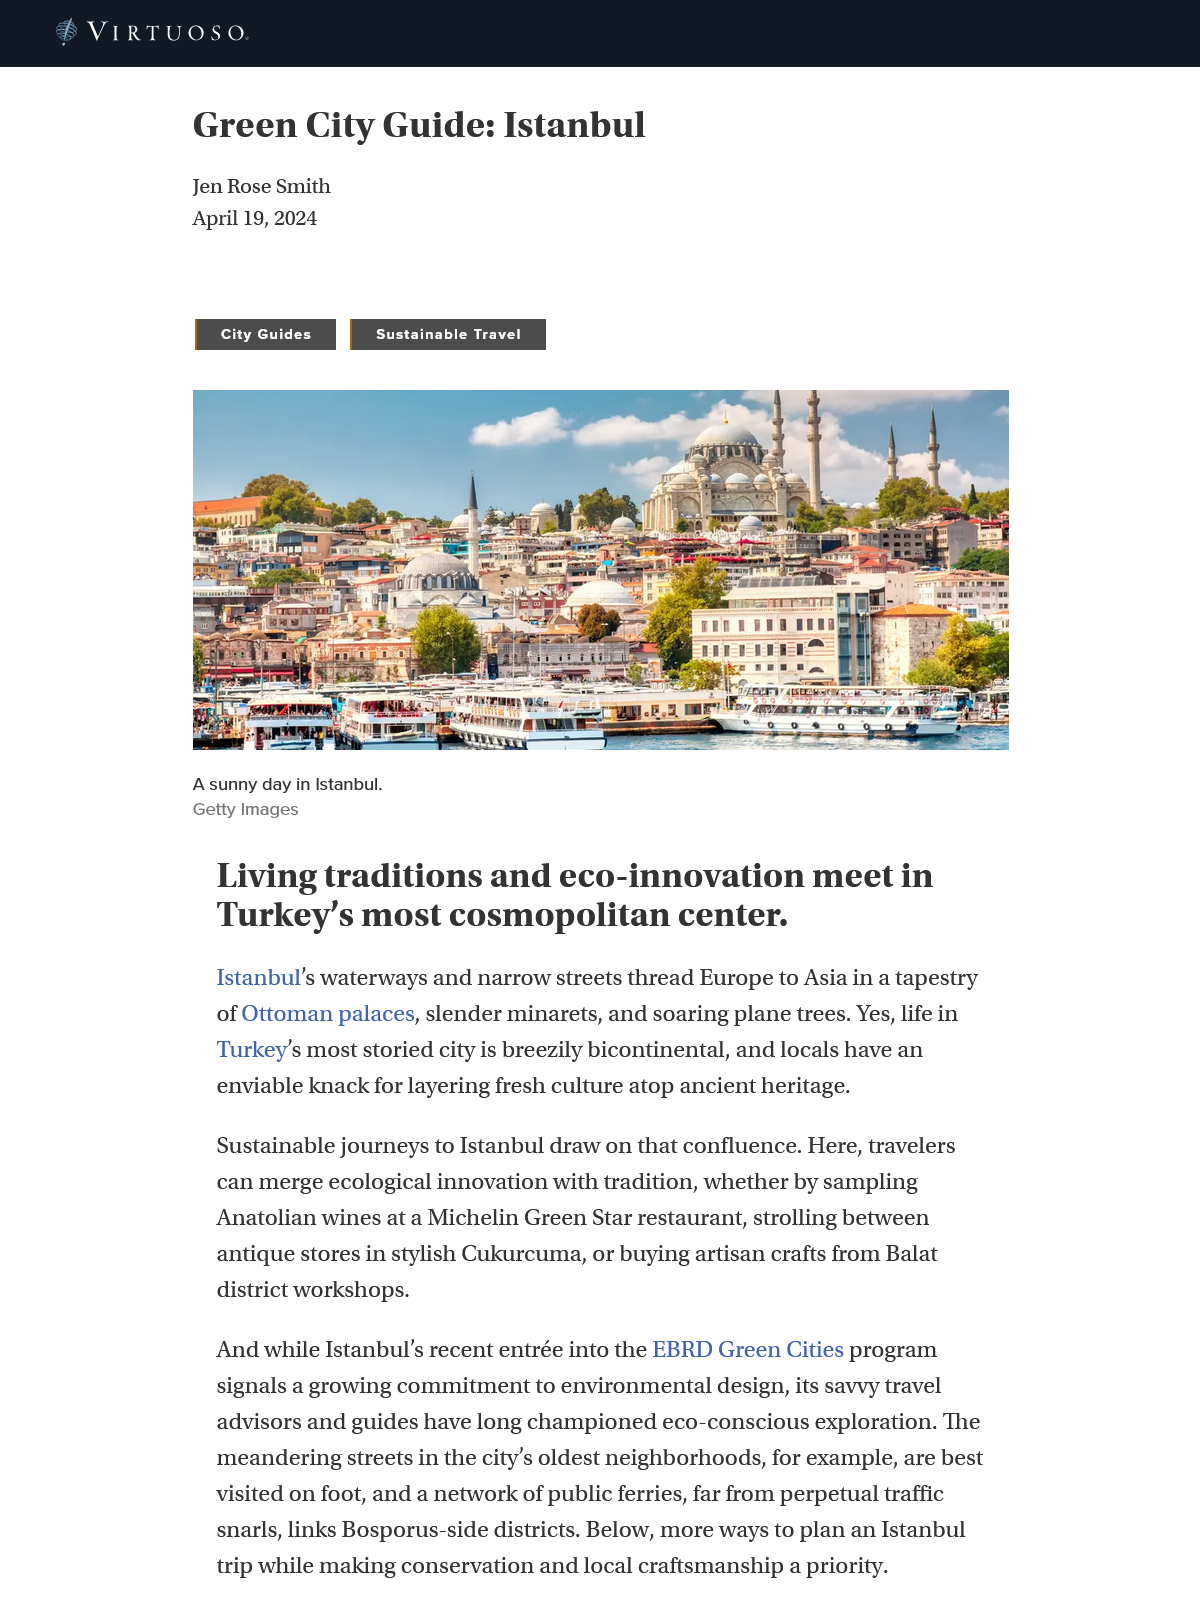 Virtuoso: Istanbul's best restaurants, hotels and shopping